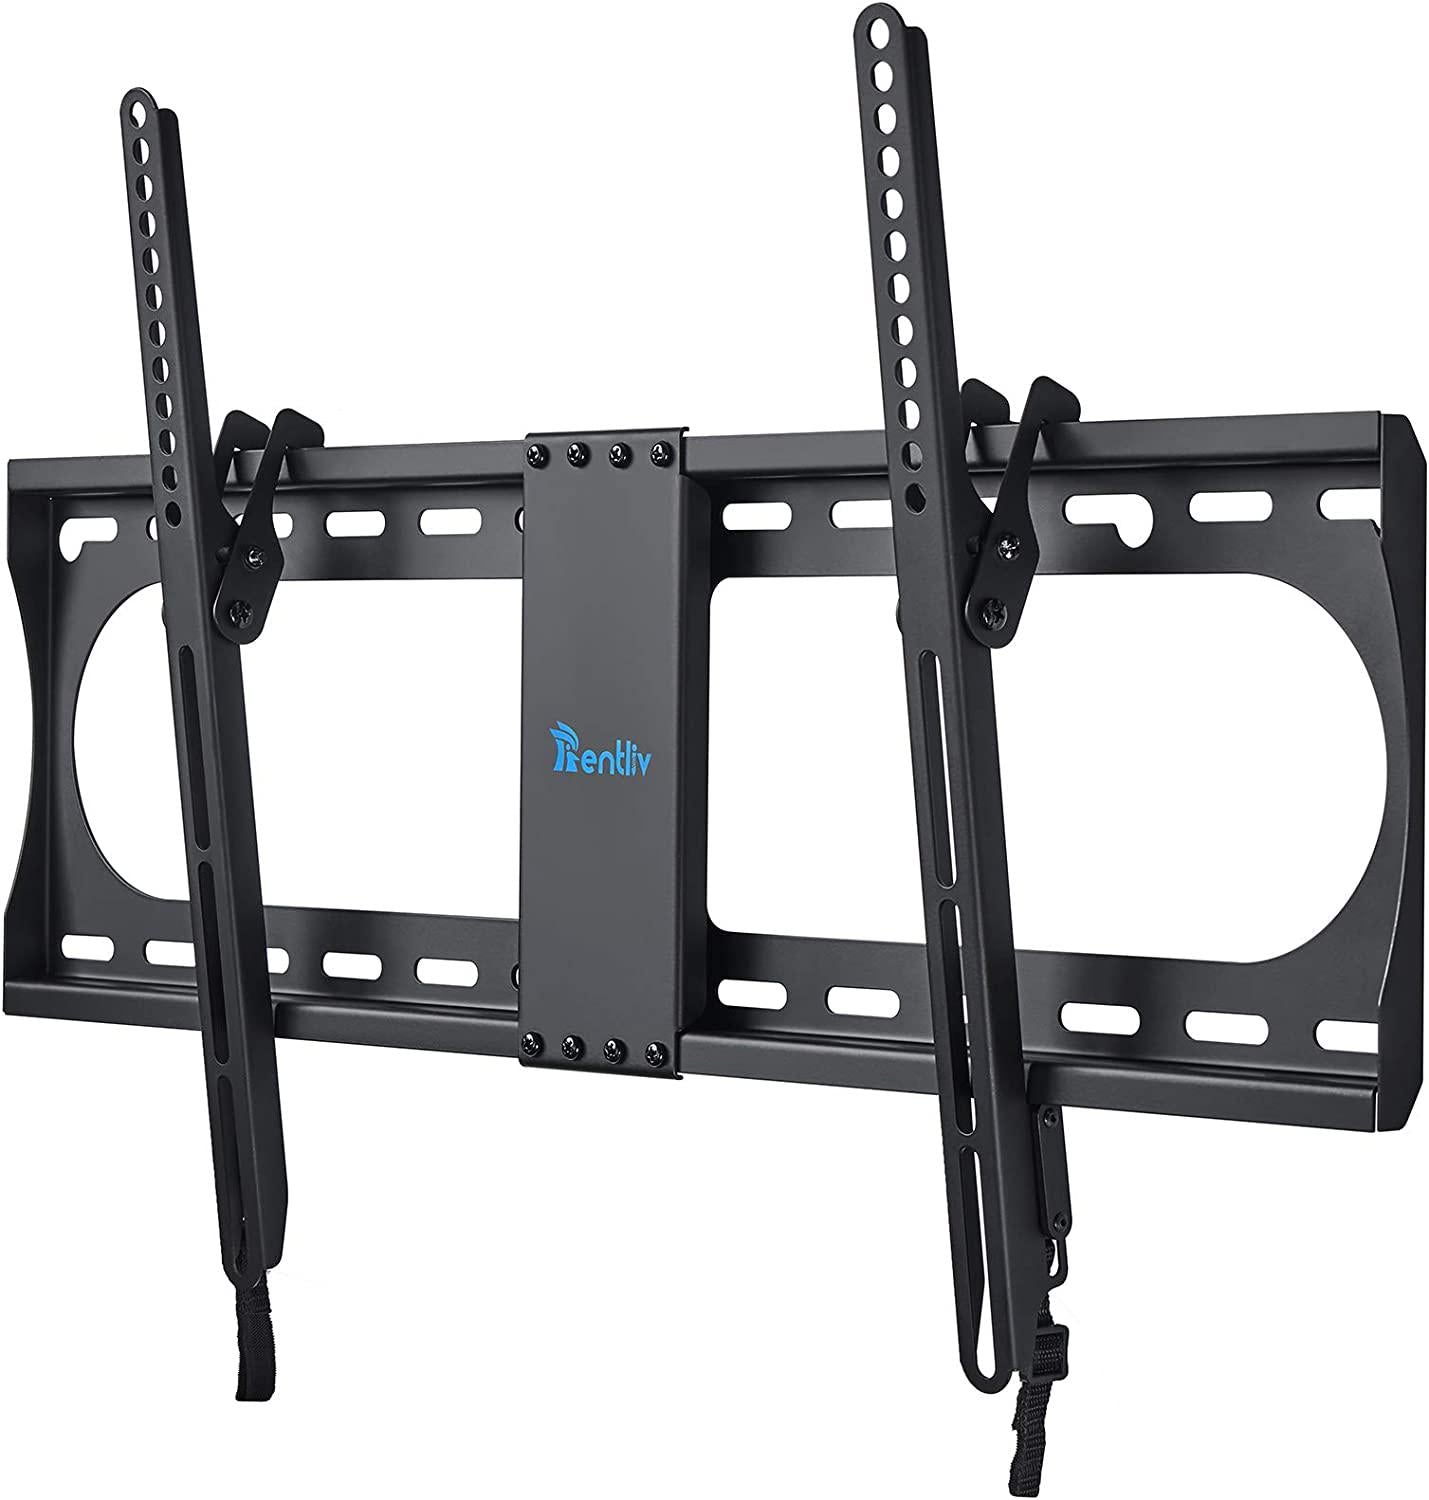 furduzz, TV Wall Mount Bracket for Most 37-70 Inch LED, LCD, OLED, Flat and Curved TVs, Tilt TV Mount Max VESA 600x400mm, Up to 60KG, Includes Bubble Level and Cable Ties